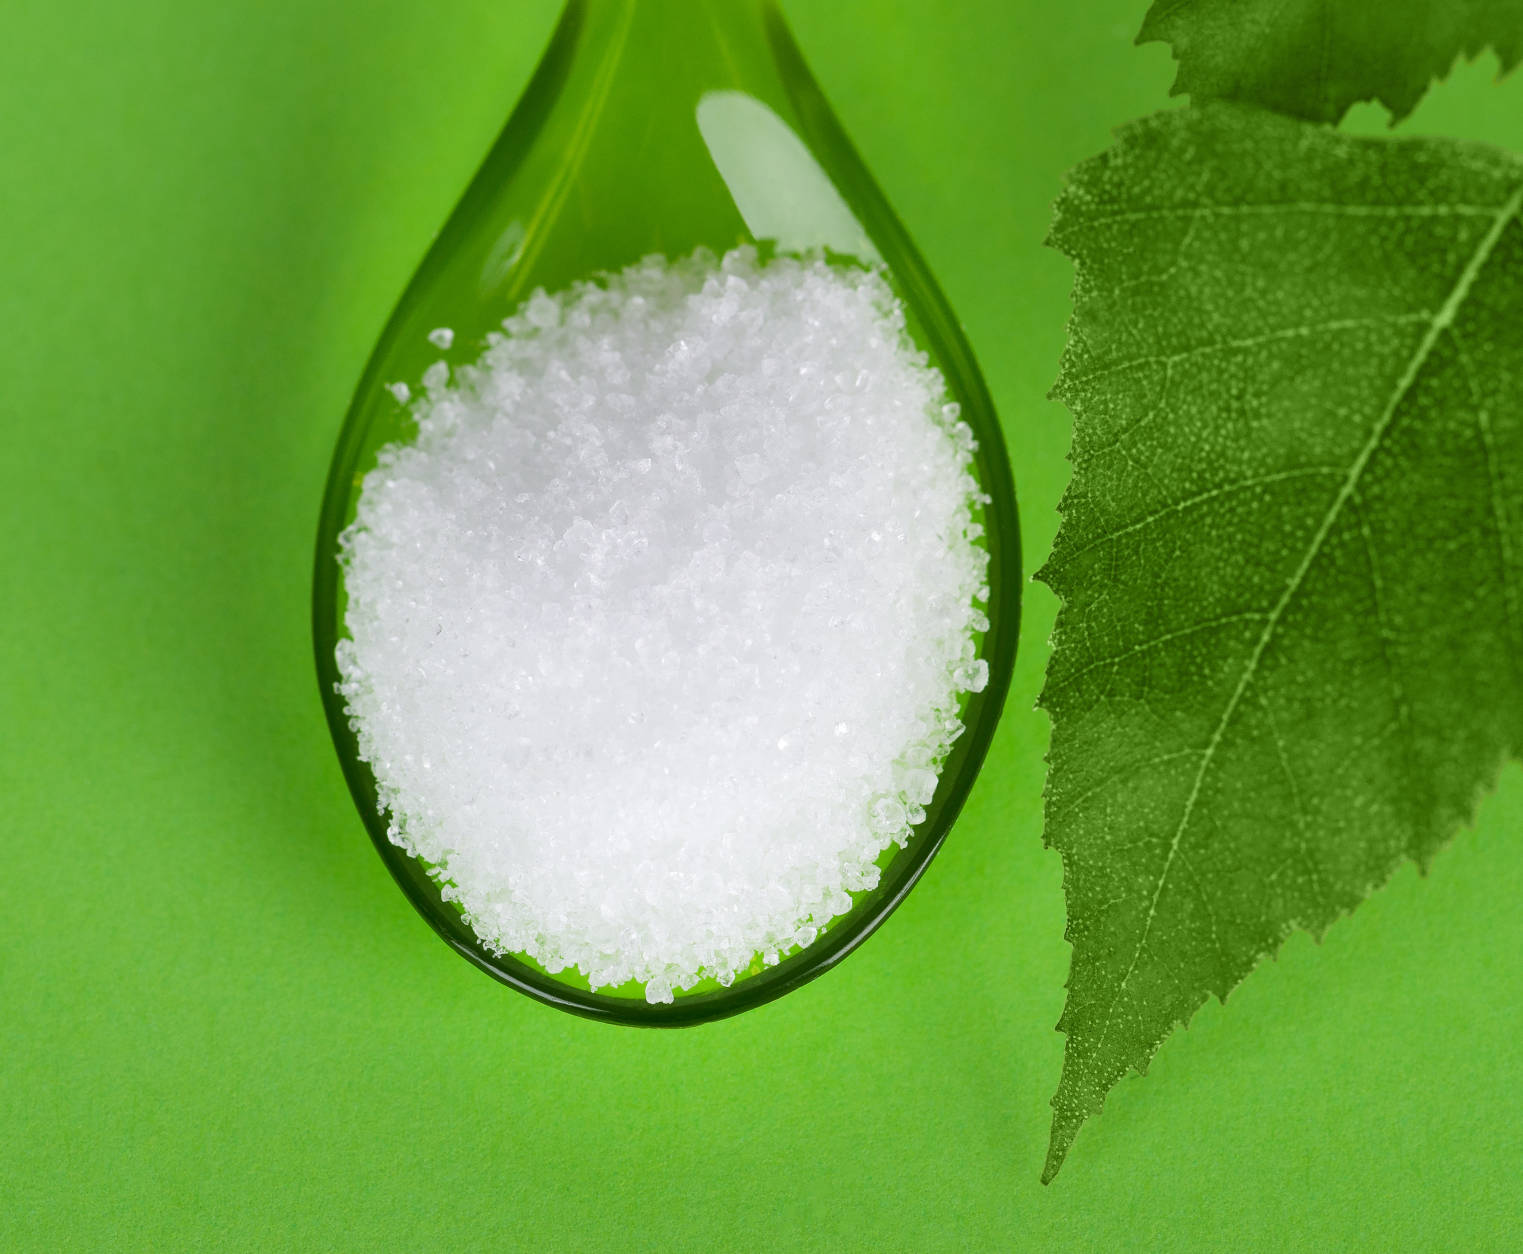 Xylitol birch sugar on plastic spoon with birch leaves on green background. White granulated sugar alcohol substitute used as sweetener that taste like table sugar, extracted from wood of birch trees.